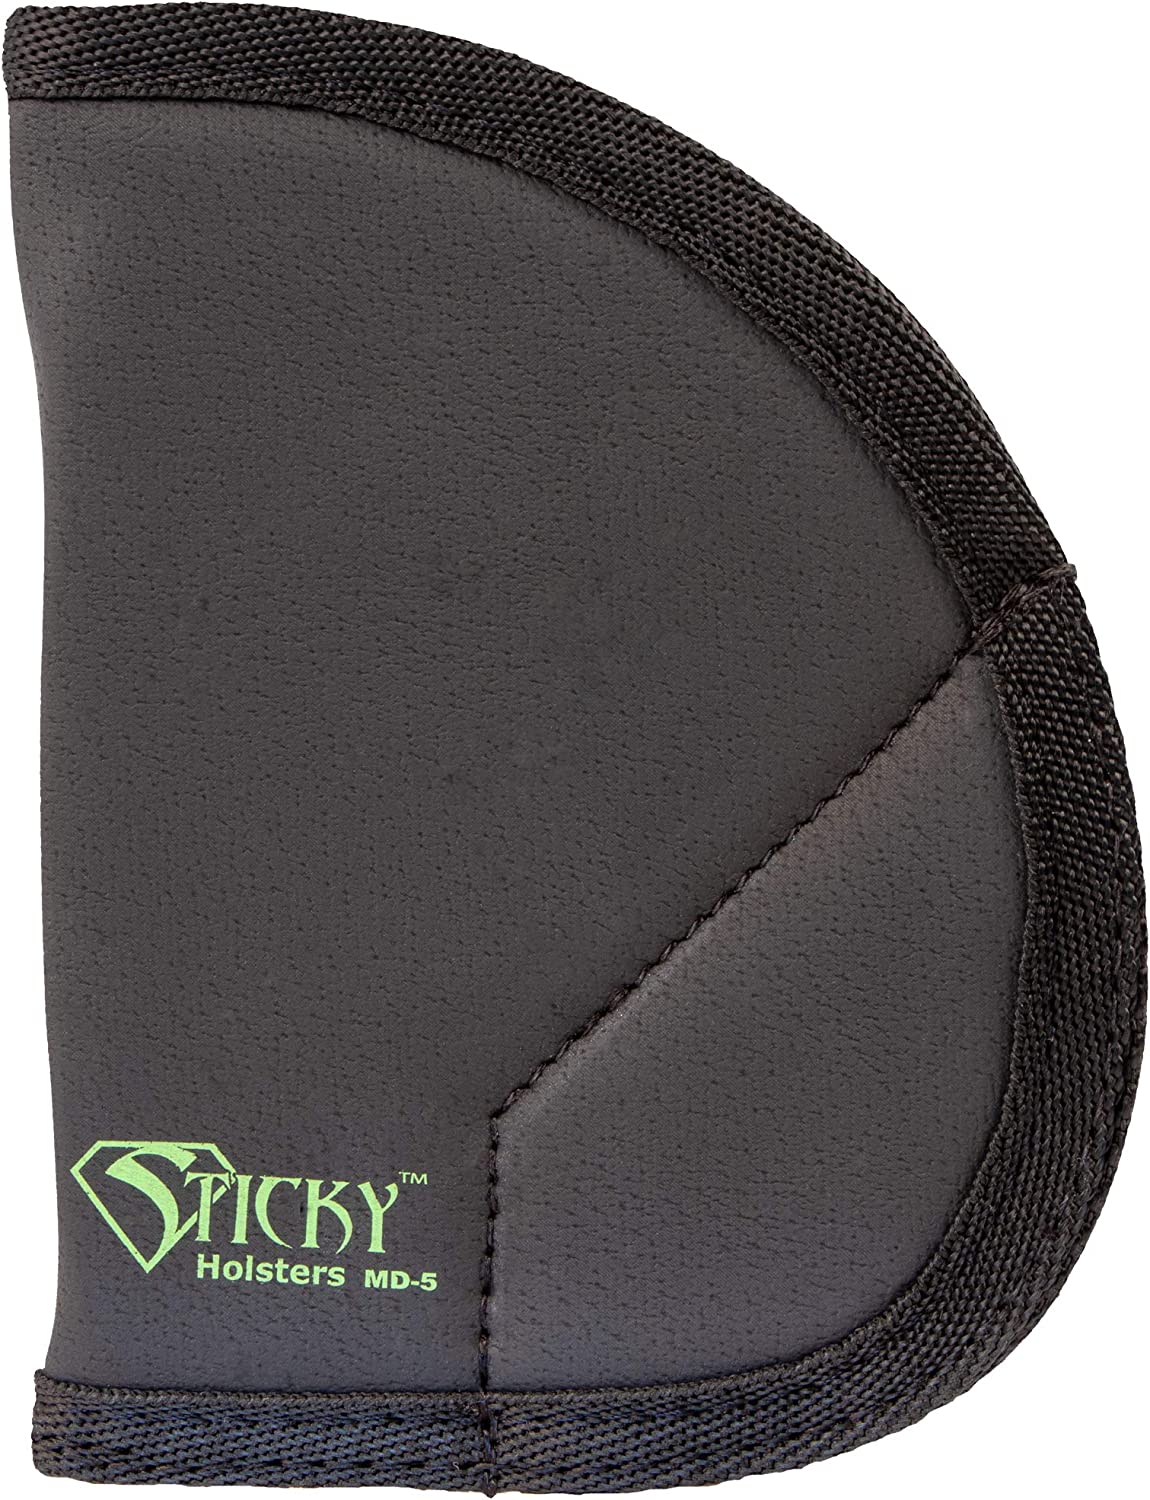 Sticky Holsters Md-5 Medium - Designed To Fit J-Frame & Similar Revolvers To 2.25